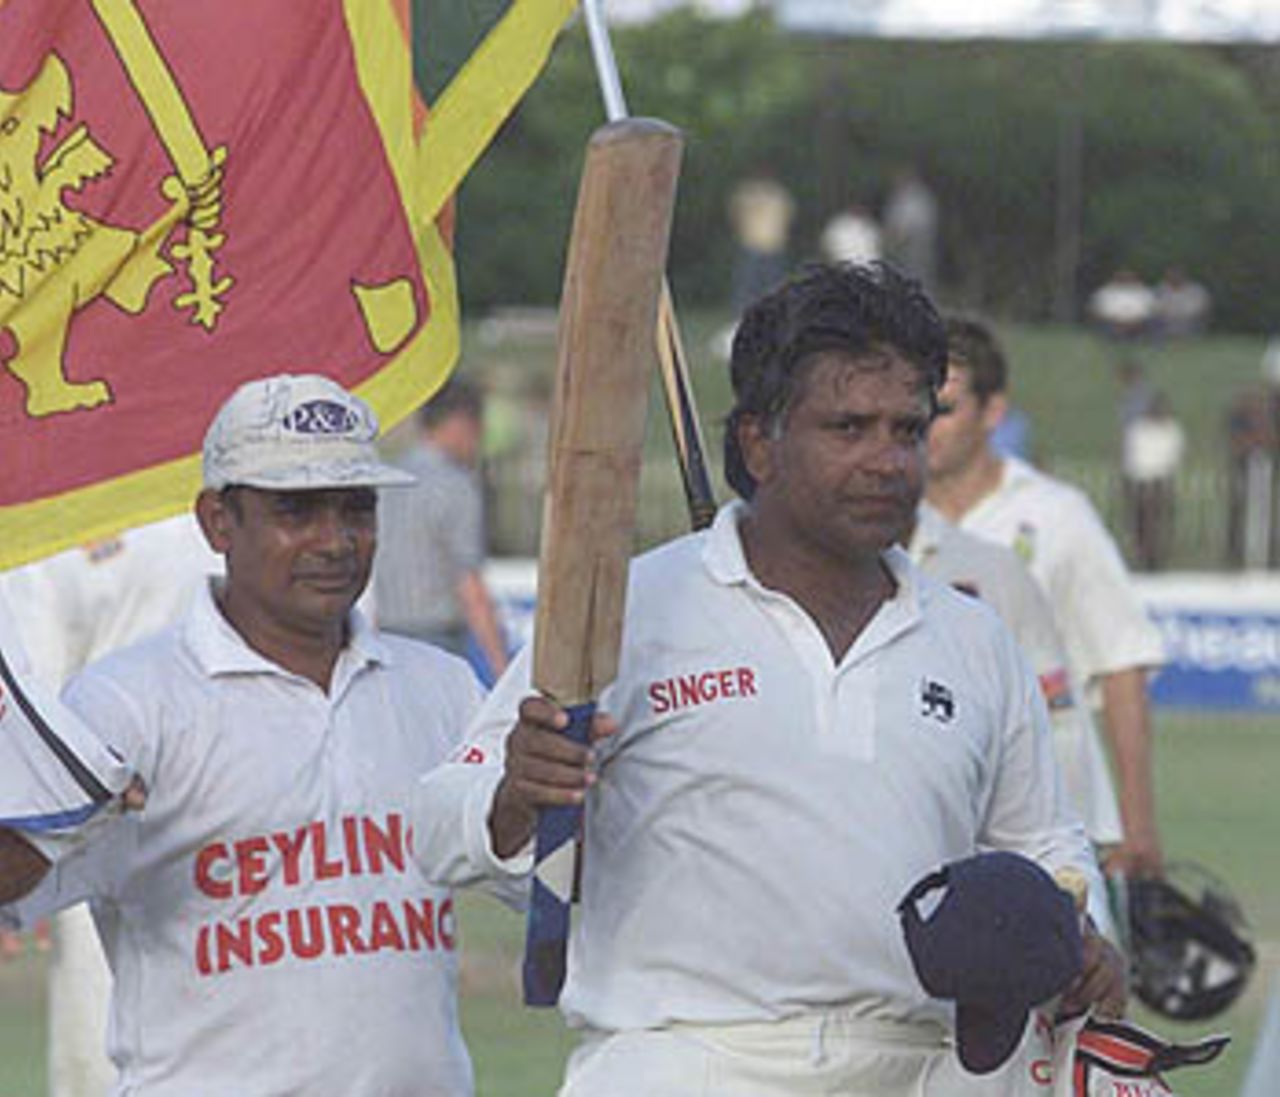 Arjuna Ranatunga acknowledges his fans after playing his last Test innings, South Africa in Sri Lanka, 2000/01, 3rd Test, Sri Lanka v South Africa, Sinhalese Sports Club Ground, Colombo, 06-10 August 2000 (Day 5).